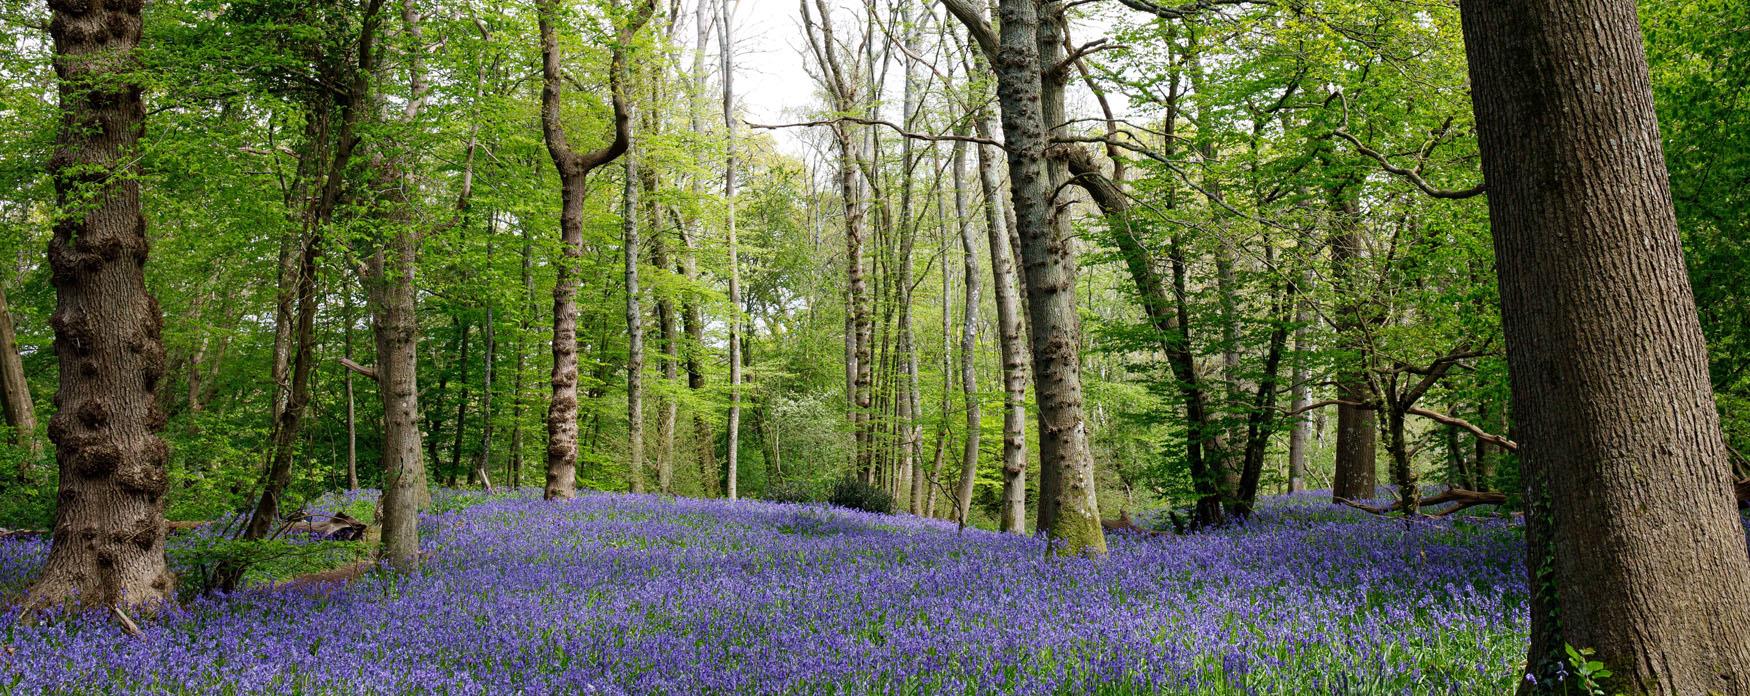 a carpet of vibrant bluebells covering the floor of an ancient woodlands with trees reaching into the sky